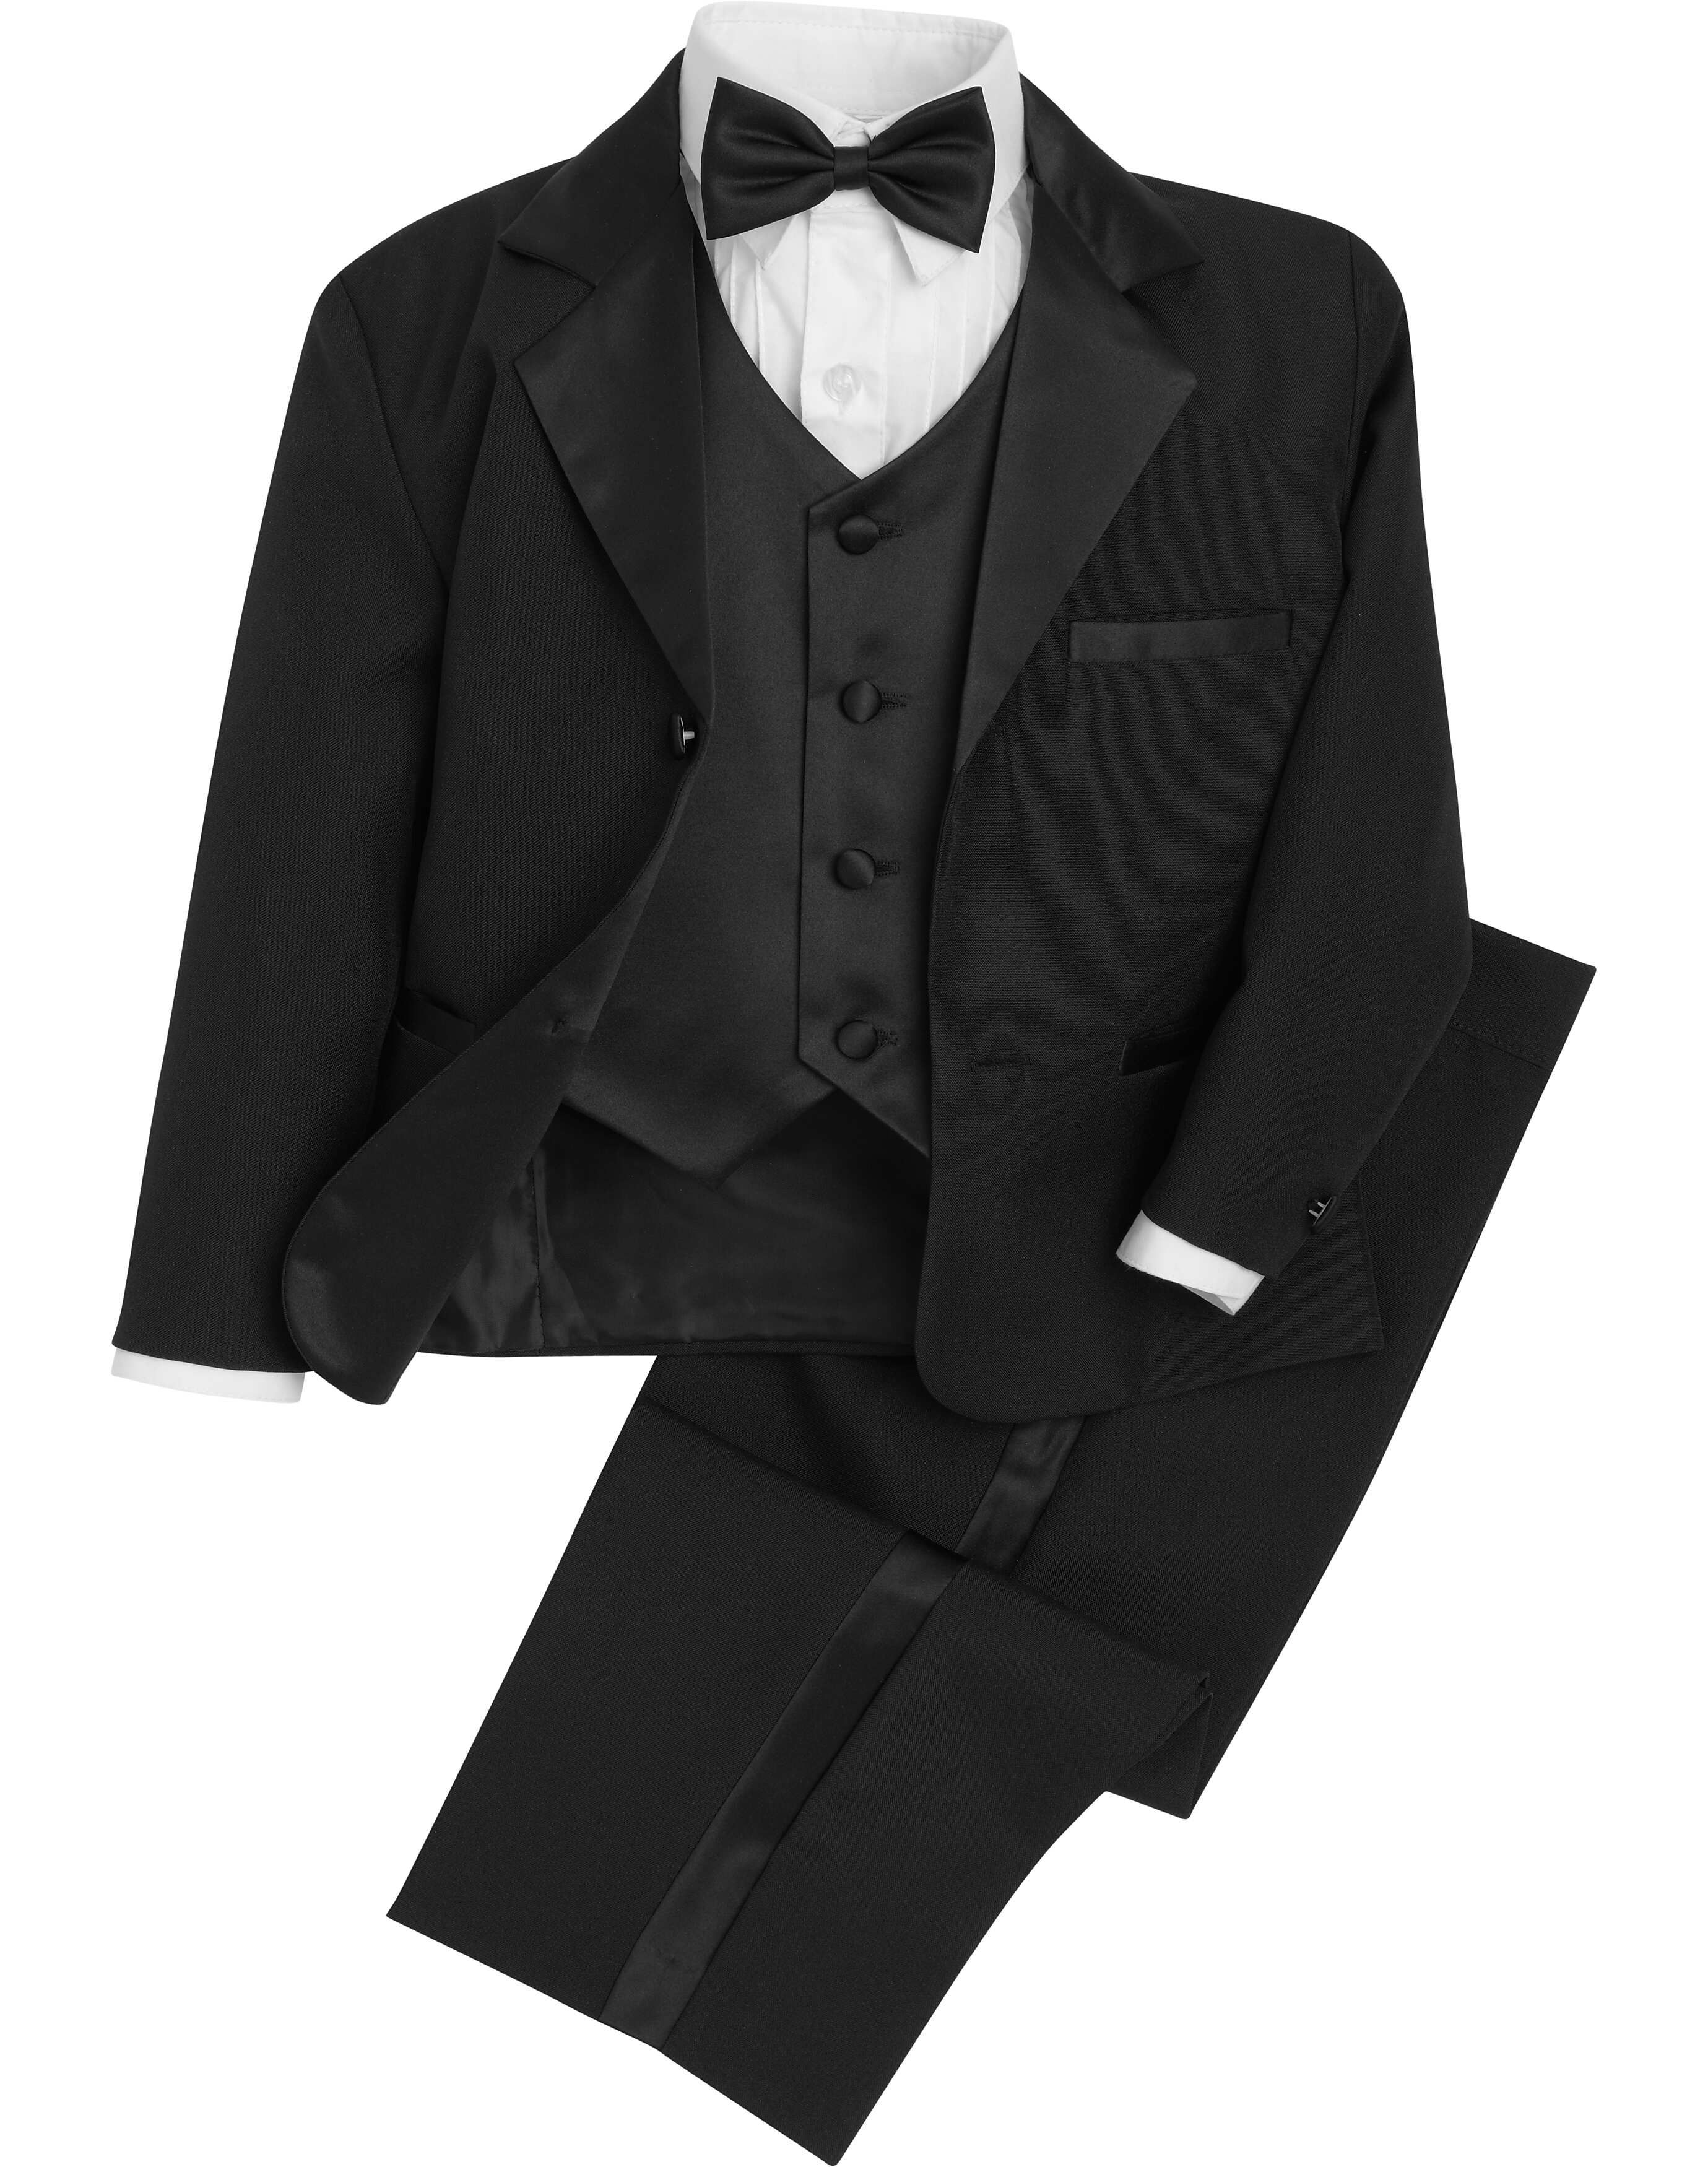 Peanut Butter Collection Toddler's Tuxedo with Bow Tie, Black | The Men's Wearhouse